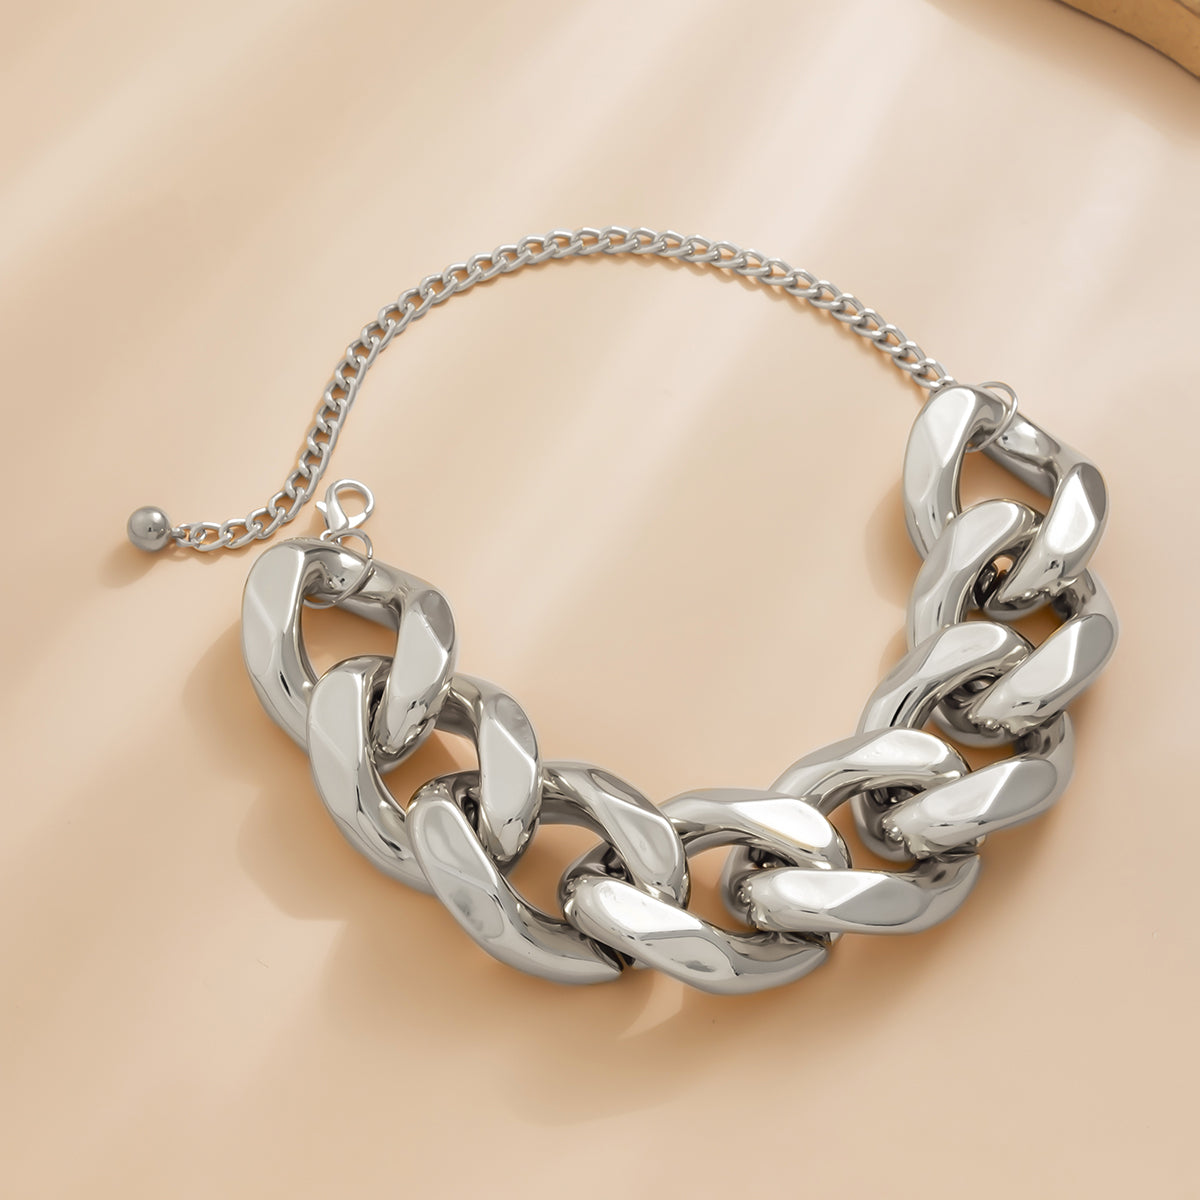 Silver-Plated Chain Necklace